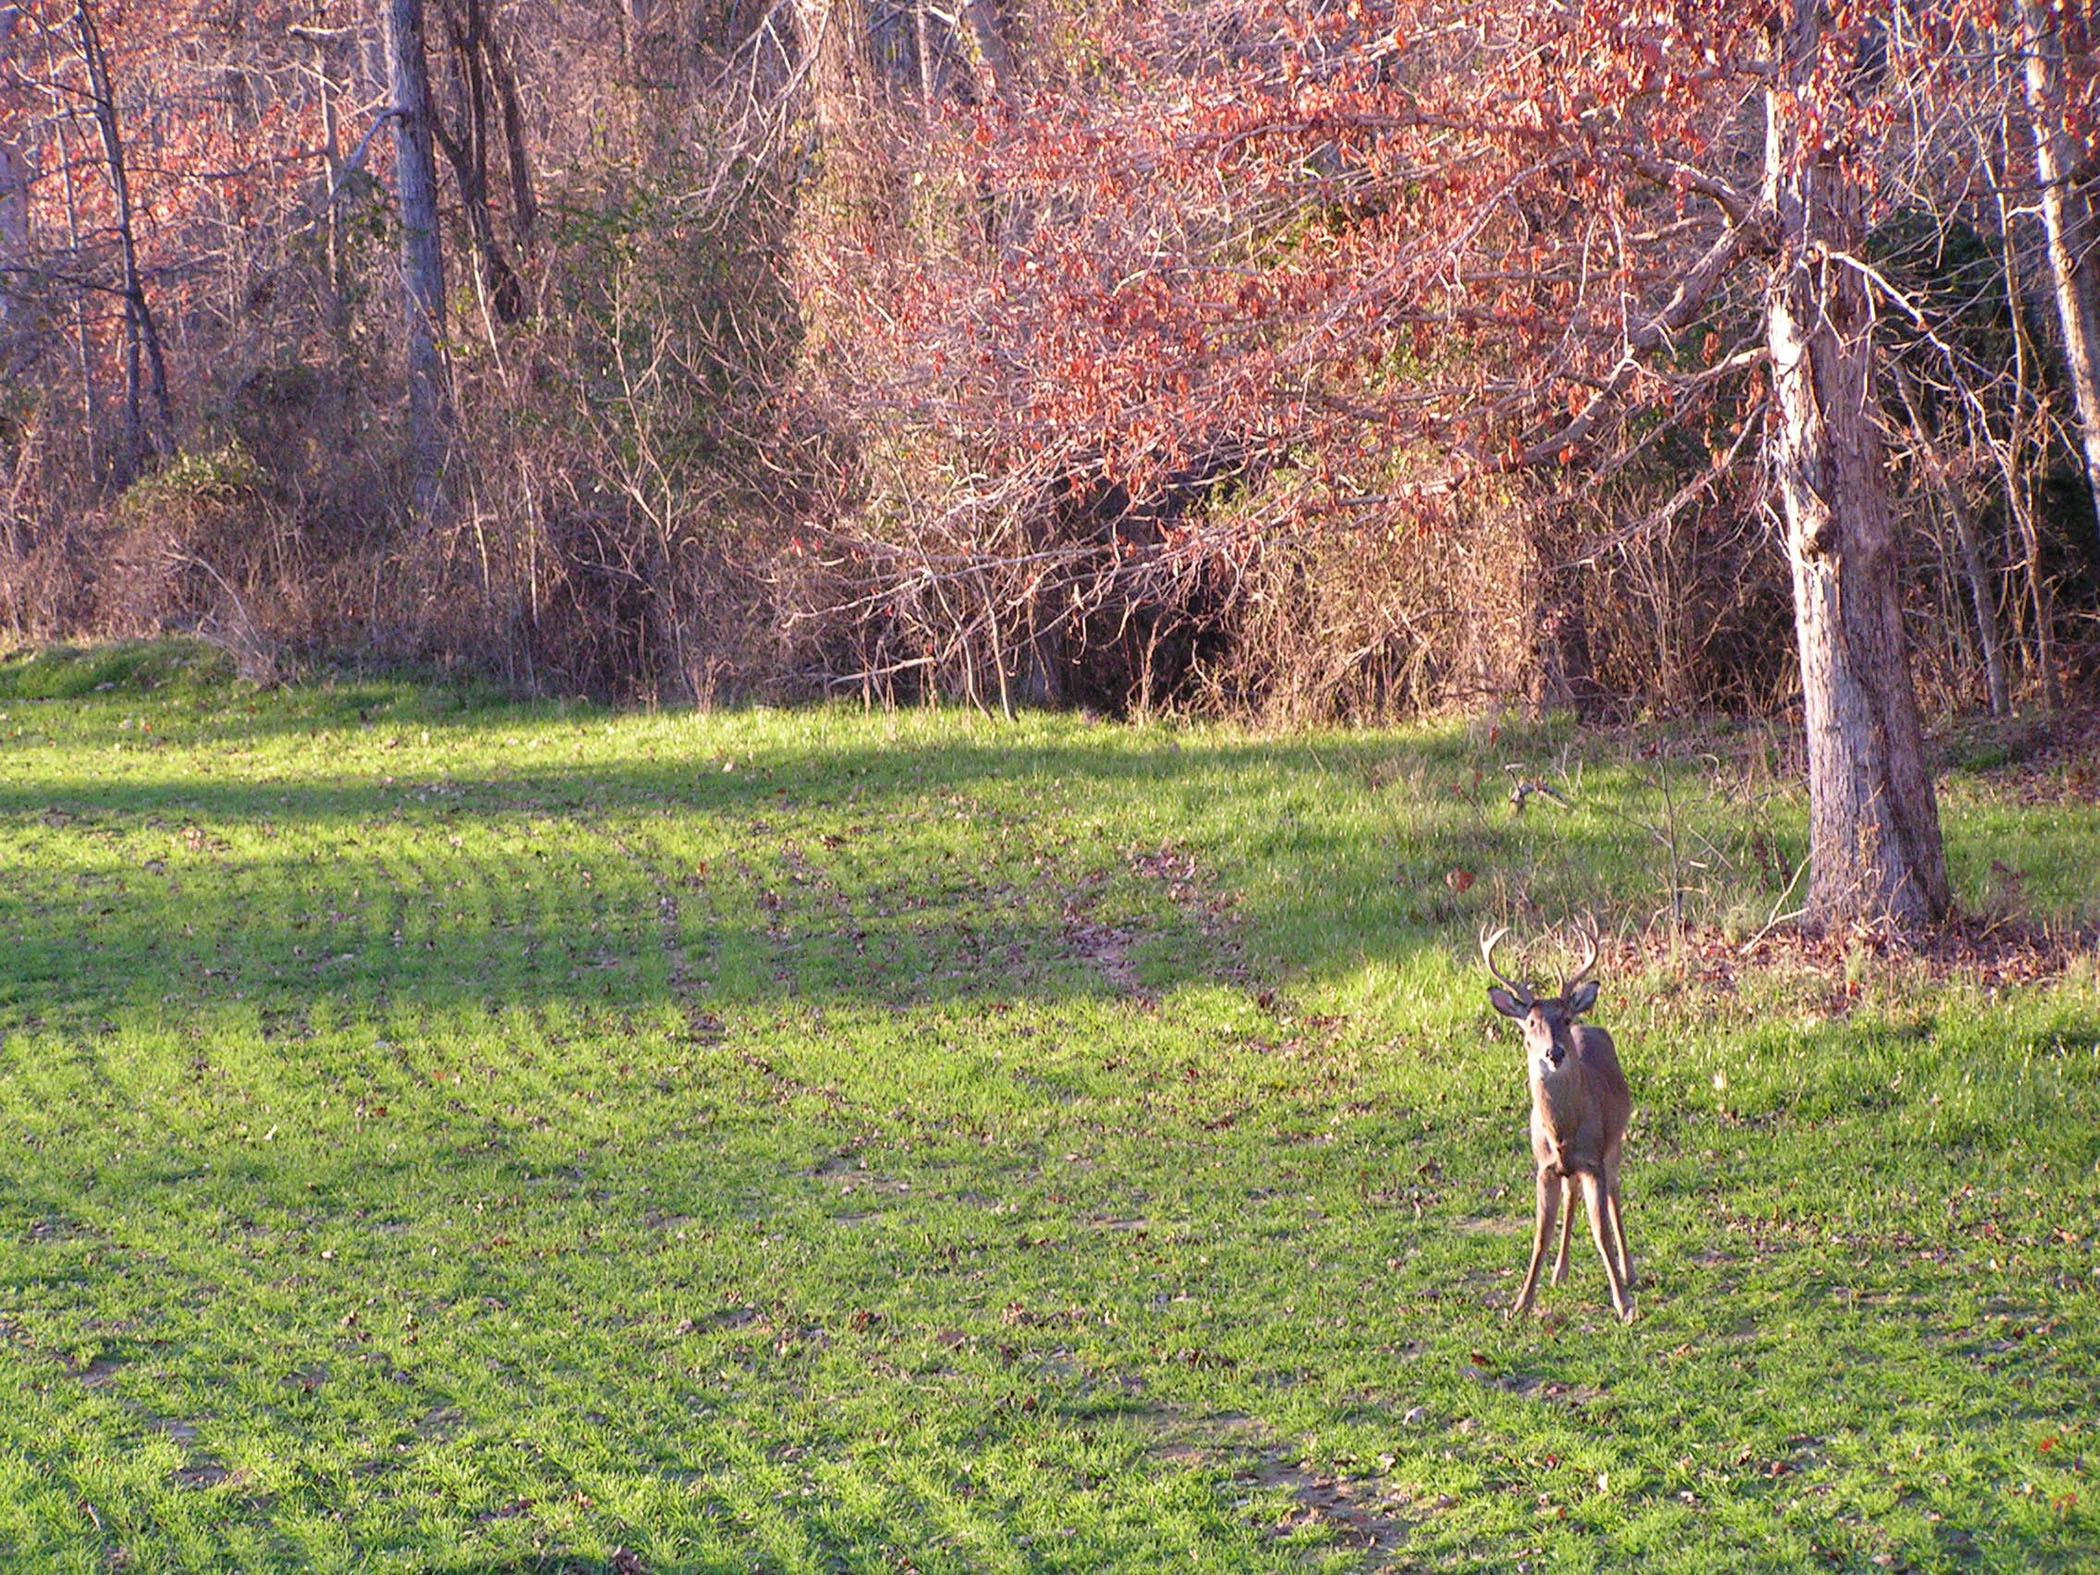 During lean times, food plots provide nutrients to help with antler development. (Photo submitted by MDWFP/Scott Edwards)